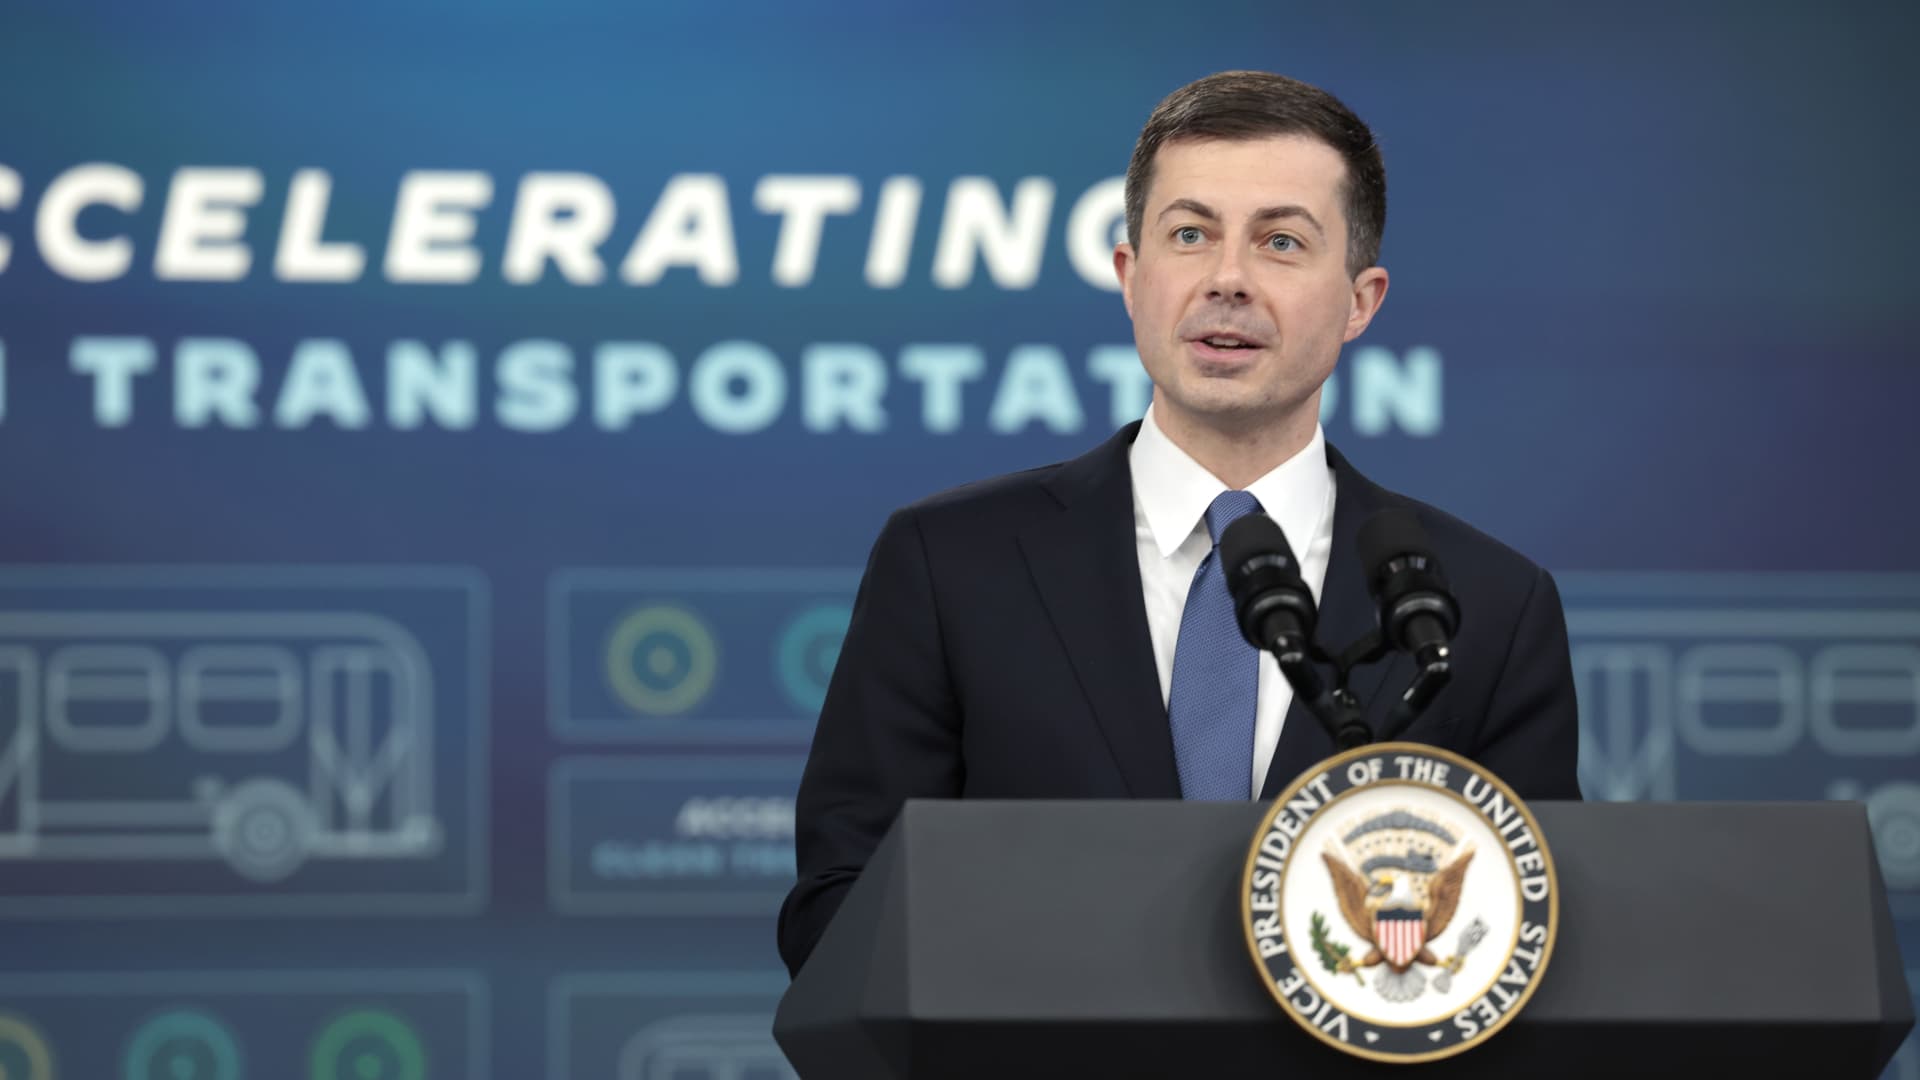 Secretary of the Department of Transportation Pete Buttigieg delivers remarks on new transportation initiatives at an event with U.S. Vice President Kamala Harris in the South Court Auditorium at Eisenhower Executive Office Building on March 07, 2022 in Washington, DC.